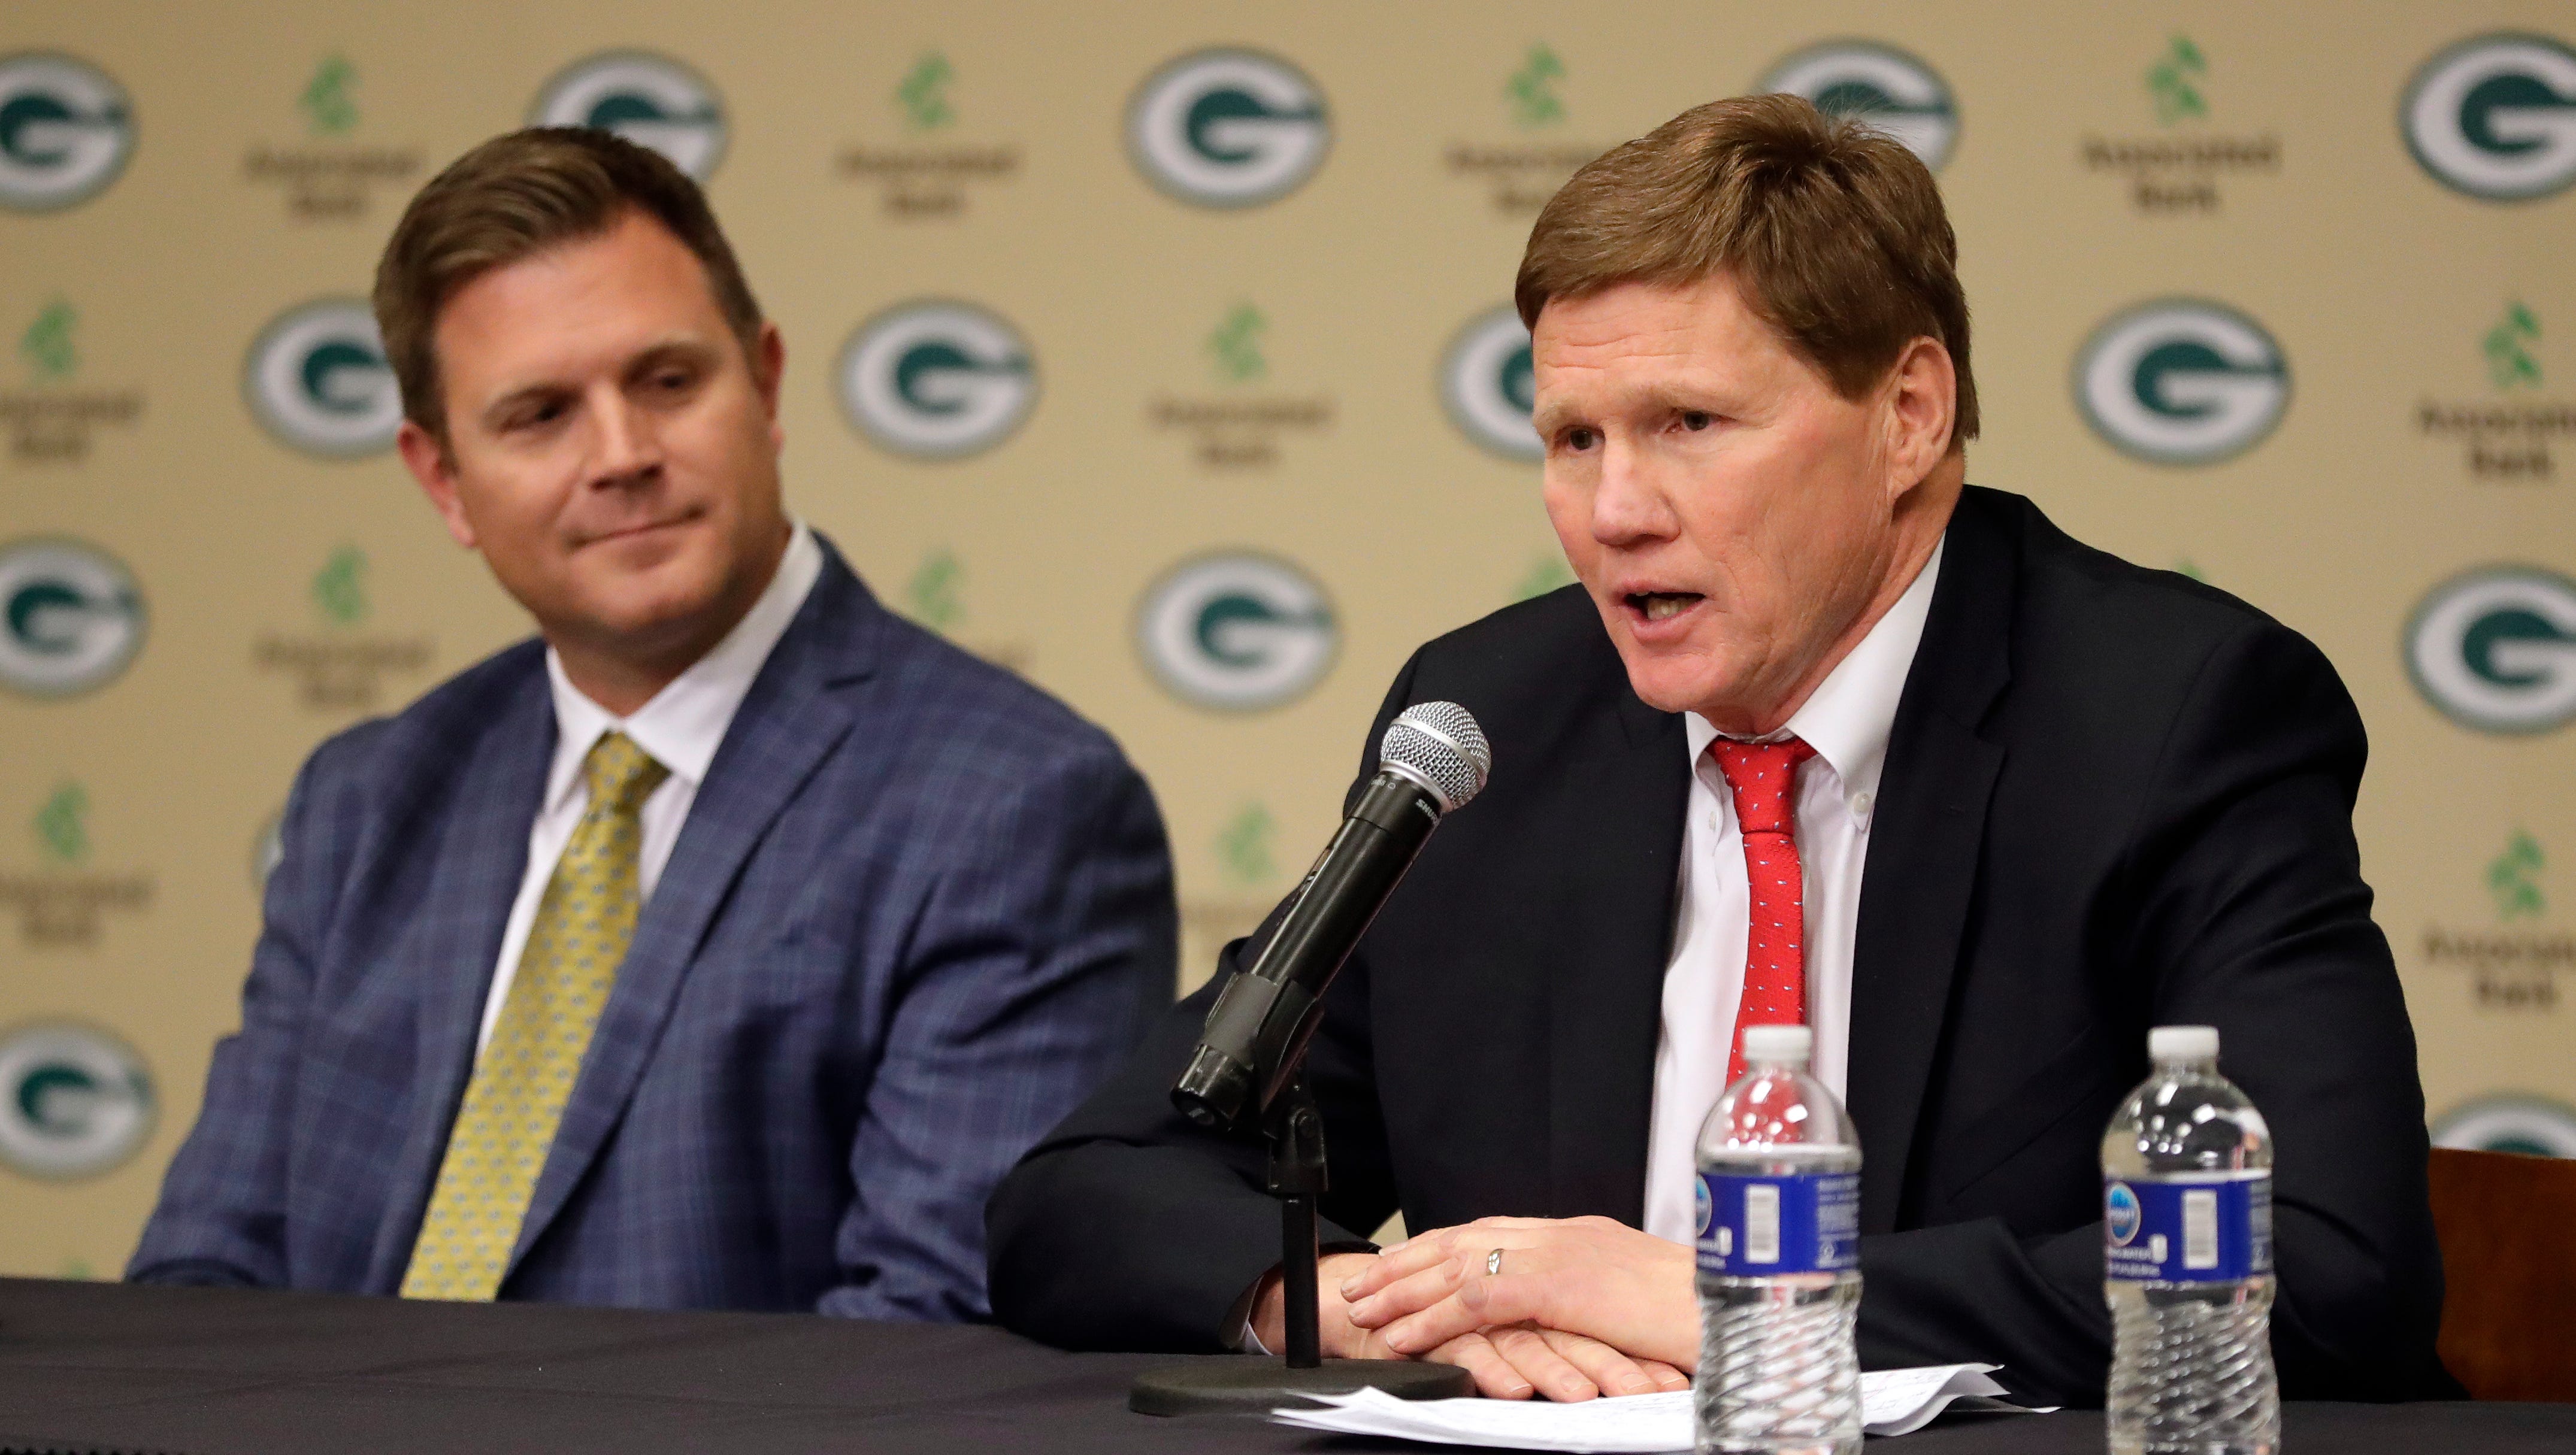 Green Bay Packers president and CEO Mark Murphy and general manager Brian Gutekunst speak to the media on Jan. 8, 2018, at Lambeau Field.